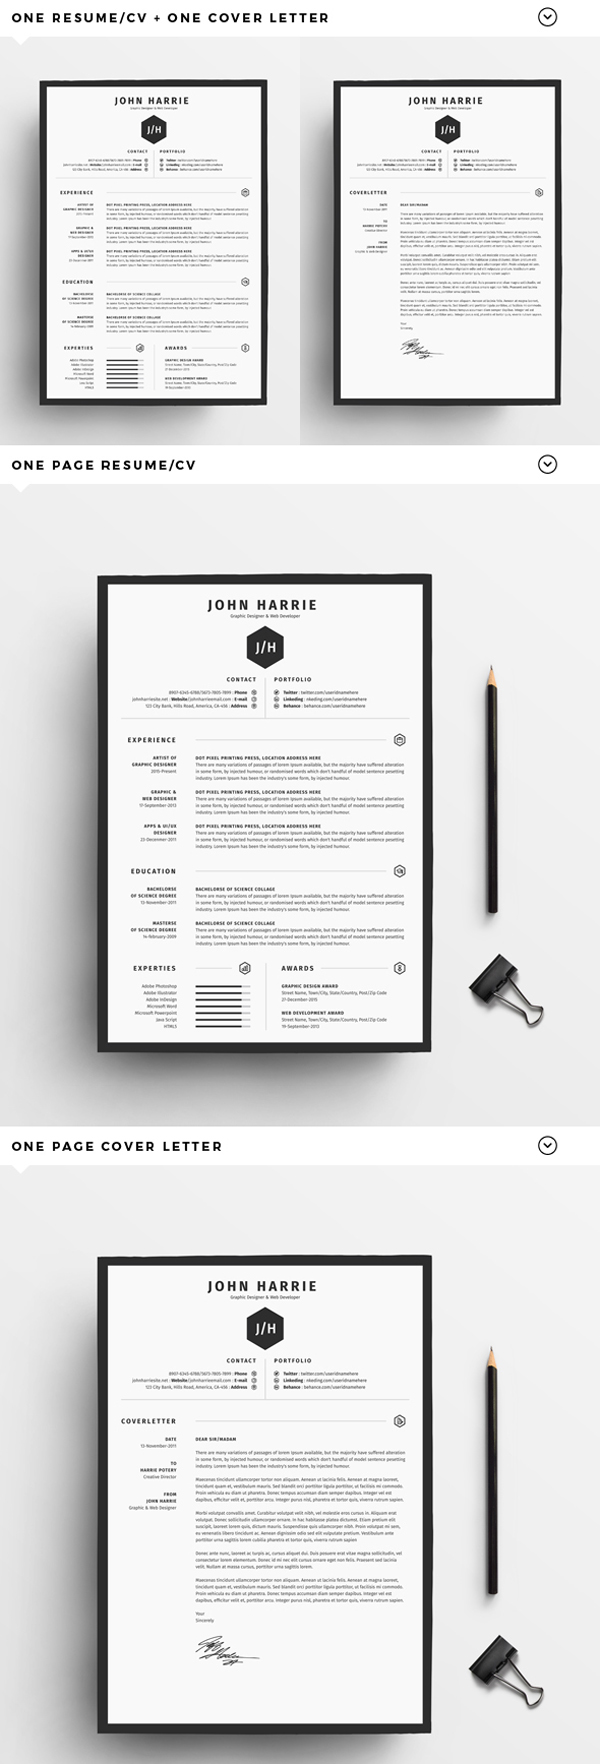 50 Free Resume Templates: Best Of 2018 -  15